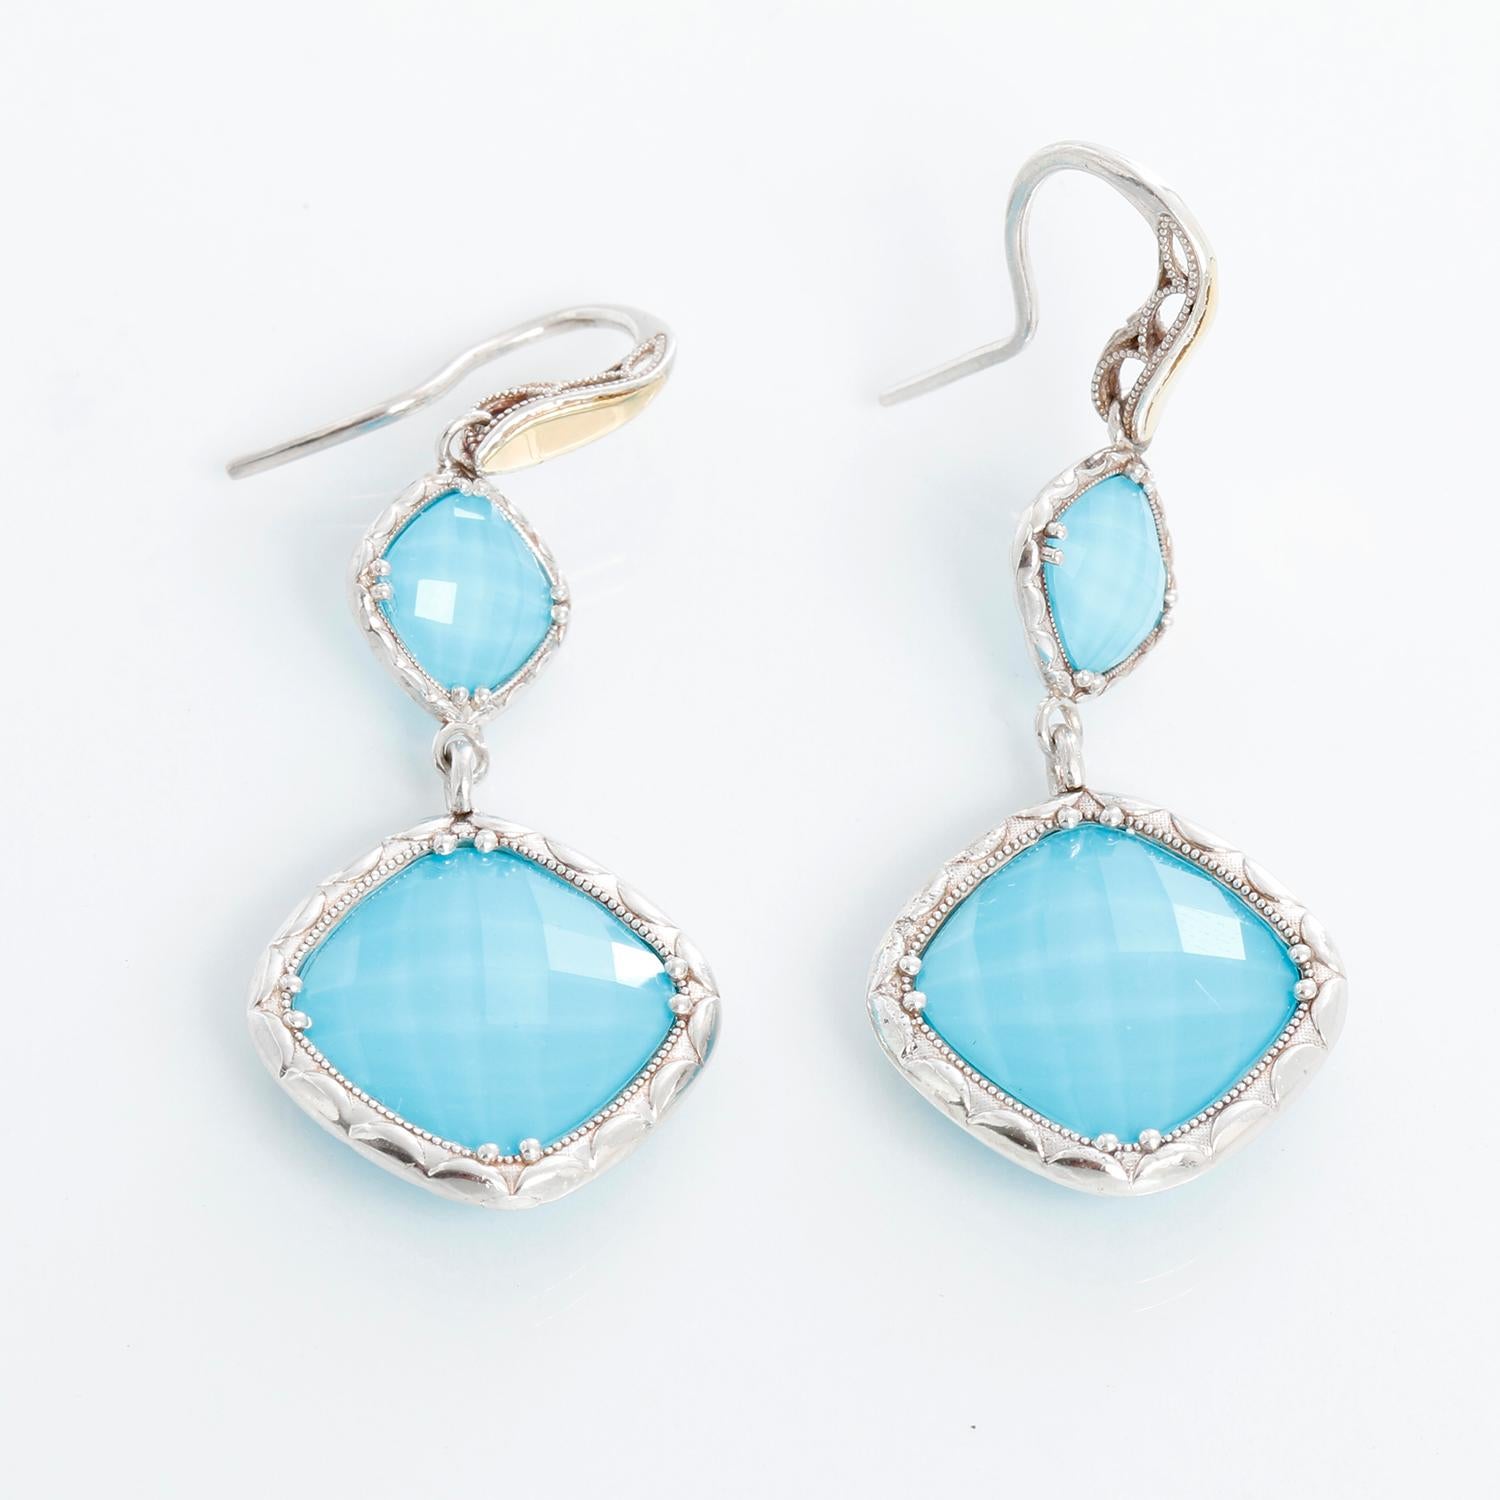 Tacori Neo-Turquoise Drop Earrings  - Silver with touches of 18kt yellow gold, faceted Clear Quartz is layered over Neolite Turquoise. Total length 2 inches. Beautiful for day or night!.